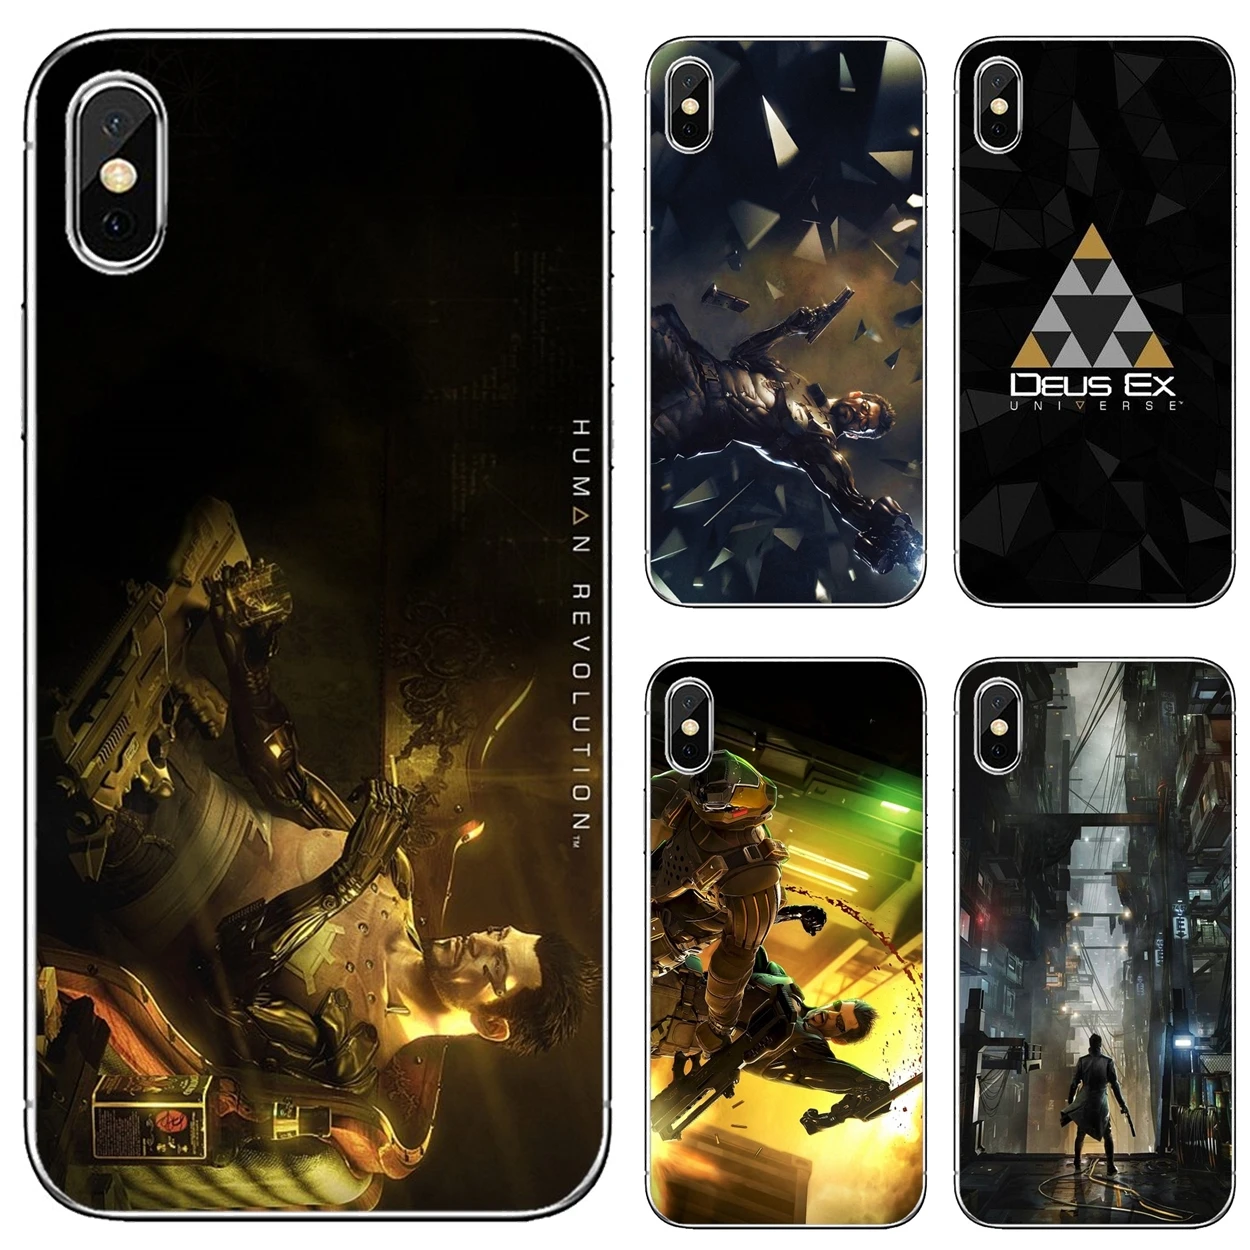 

Deus-Ex-Mankind-Divided-Games Soft Case Cover For iPod Touch iPhone 10 11 12 Pro 4S 5S SE 5C 6 6S 7 8 X XR XS Plus Max 2020